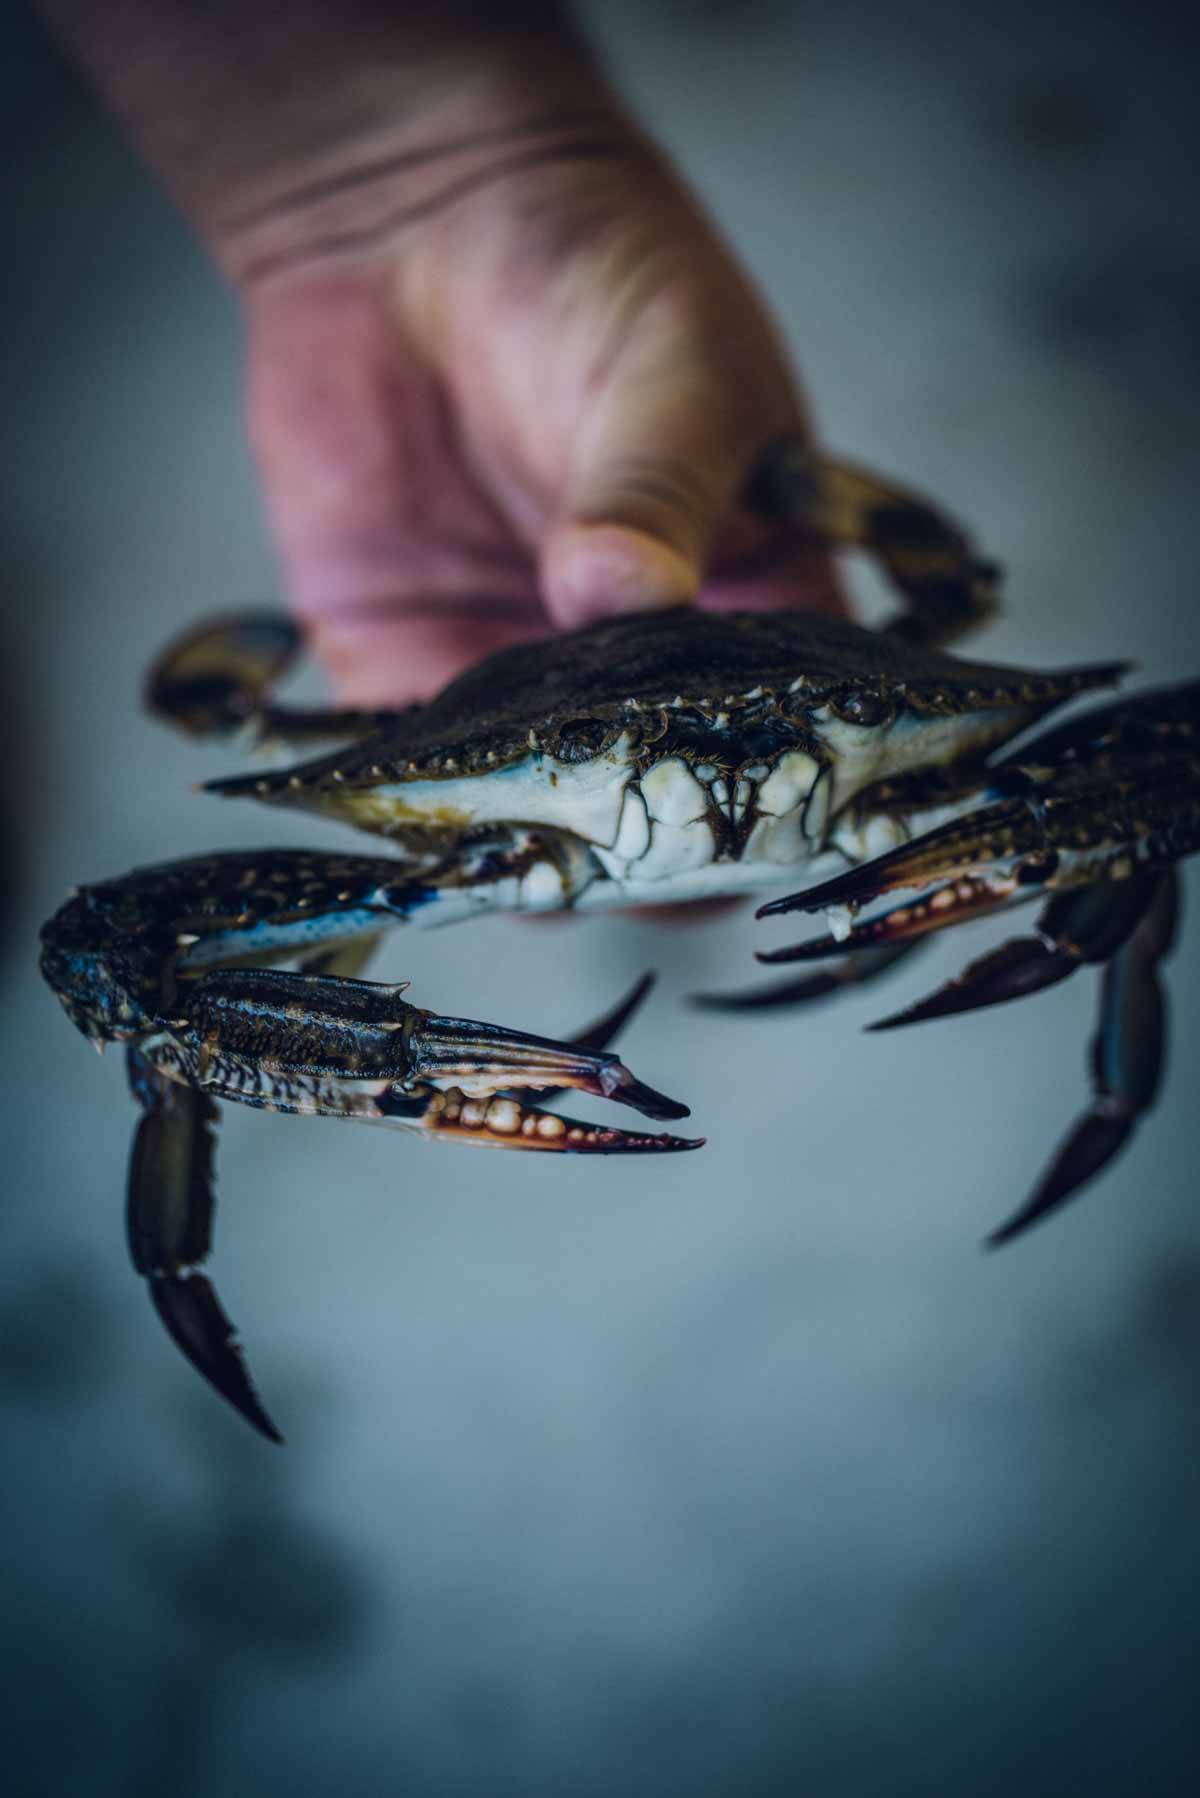 BBlue Swimmer Crabs | Chew Town Food Blog